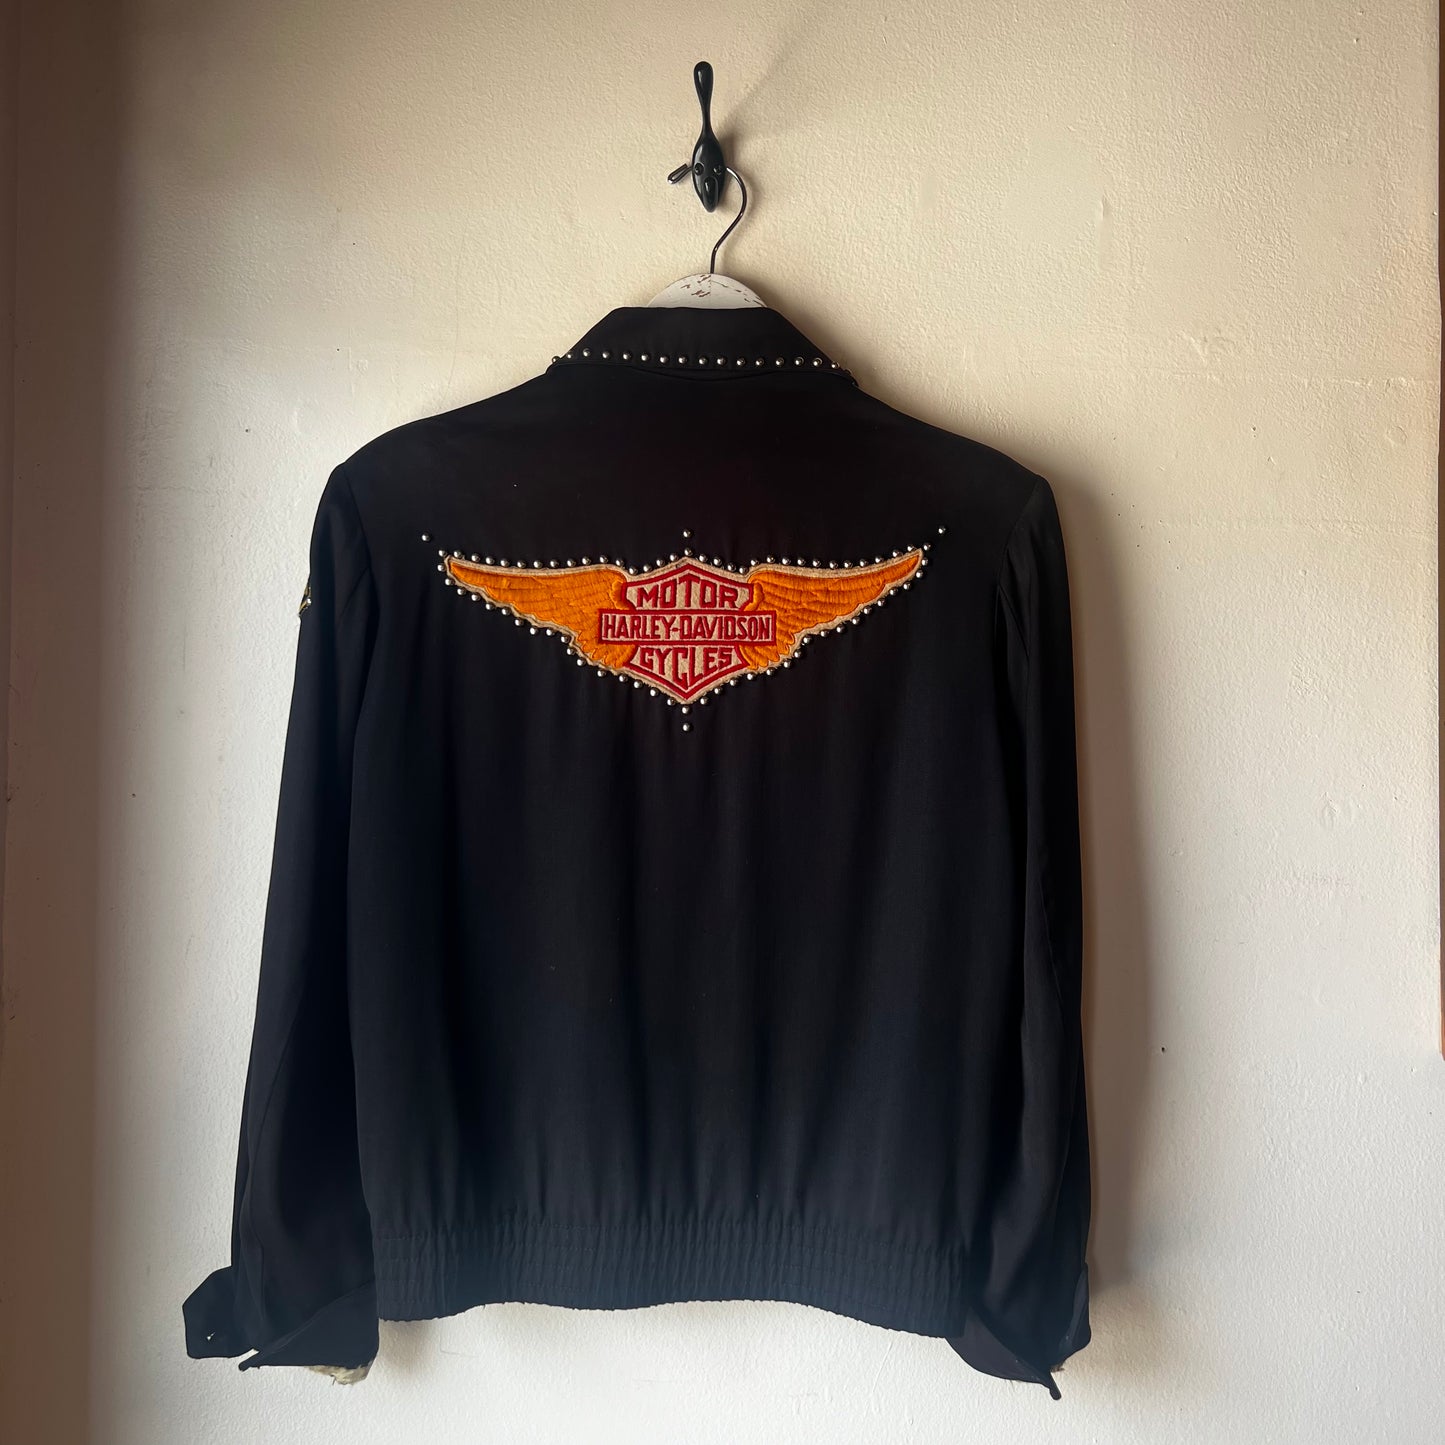 RARE VTG Harley Davidson "Sport Chief" Jacket AS IS FIRM